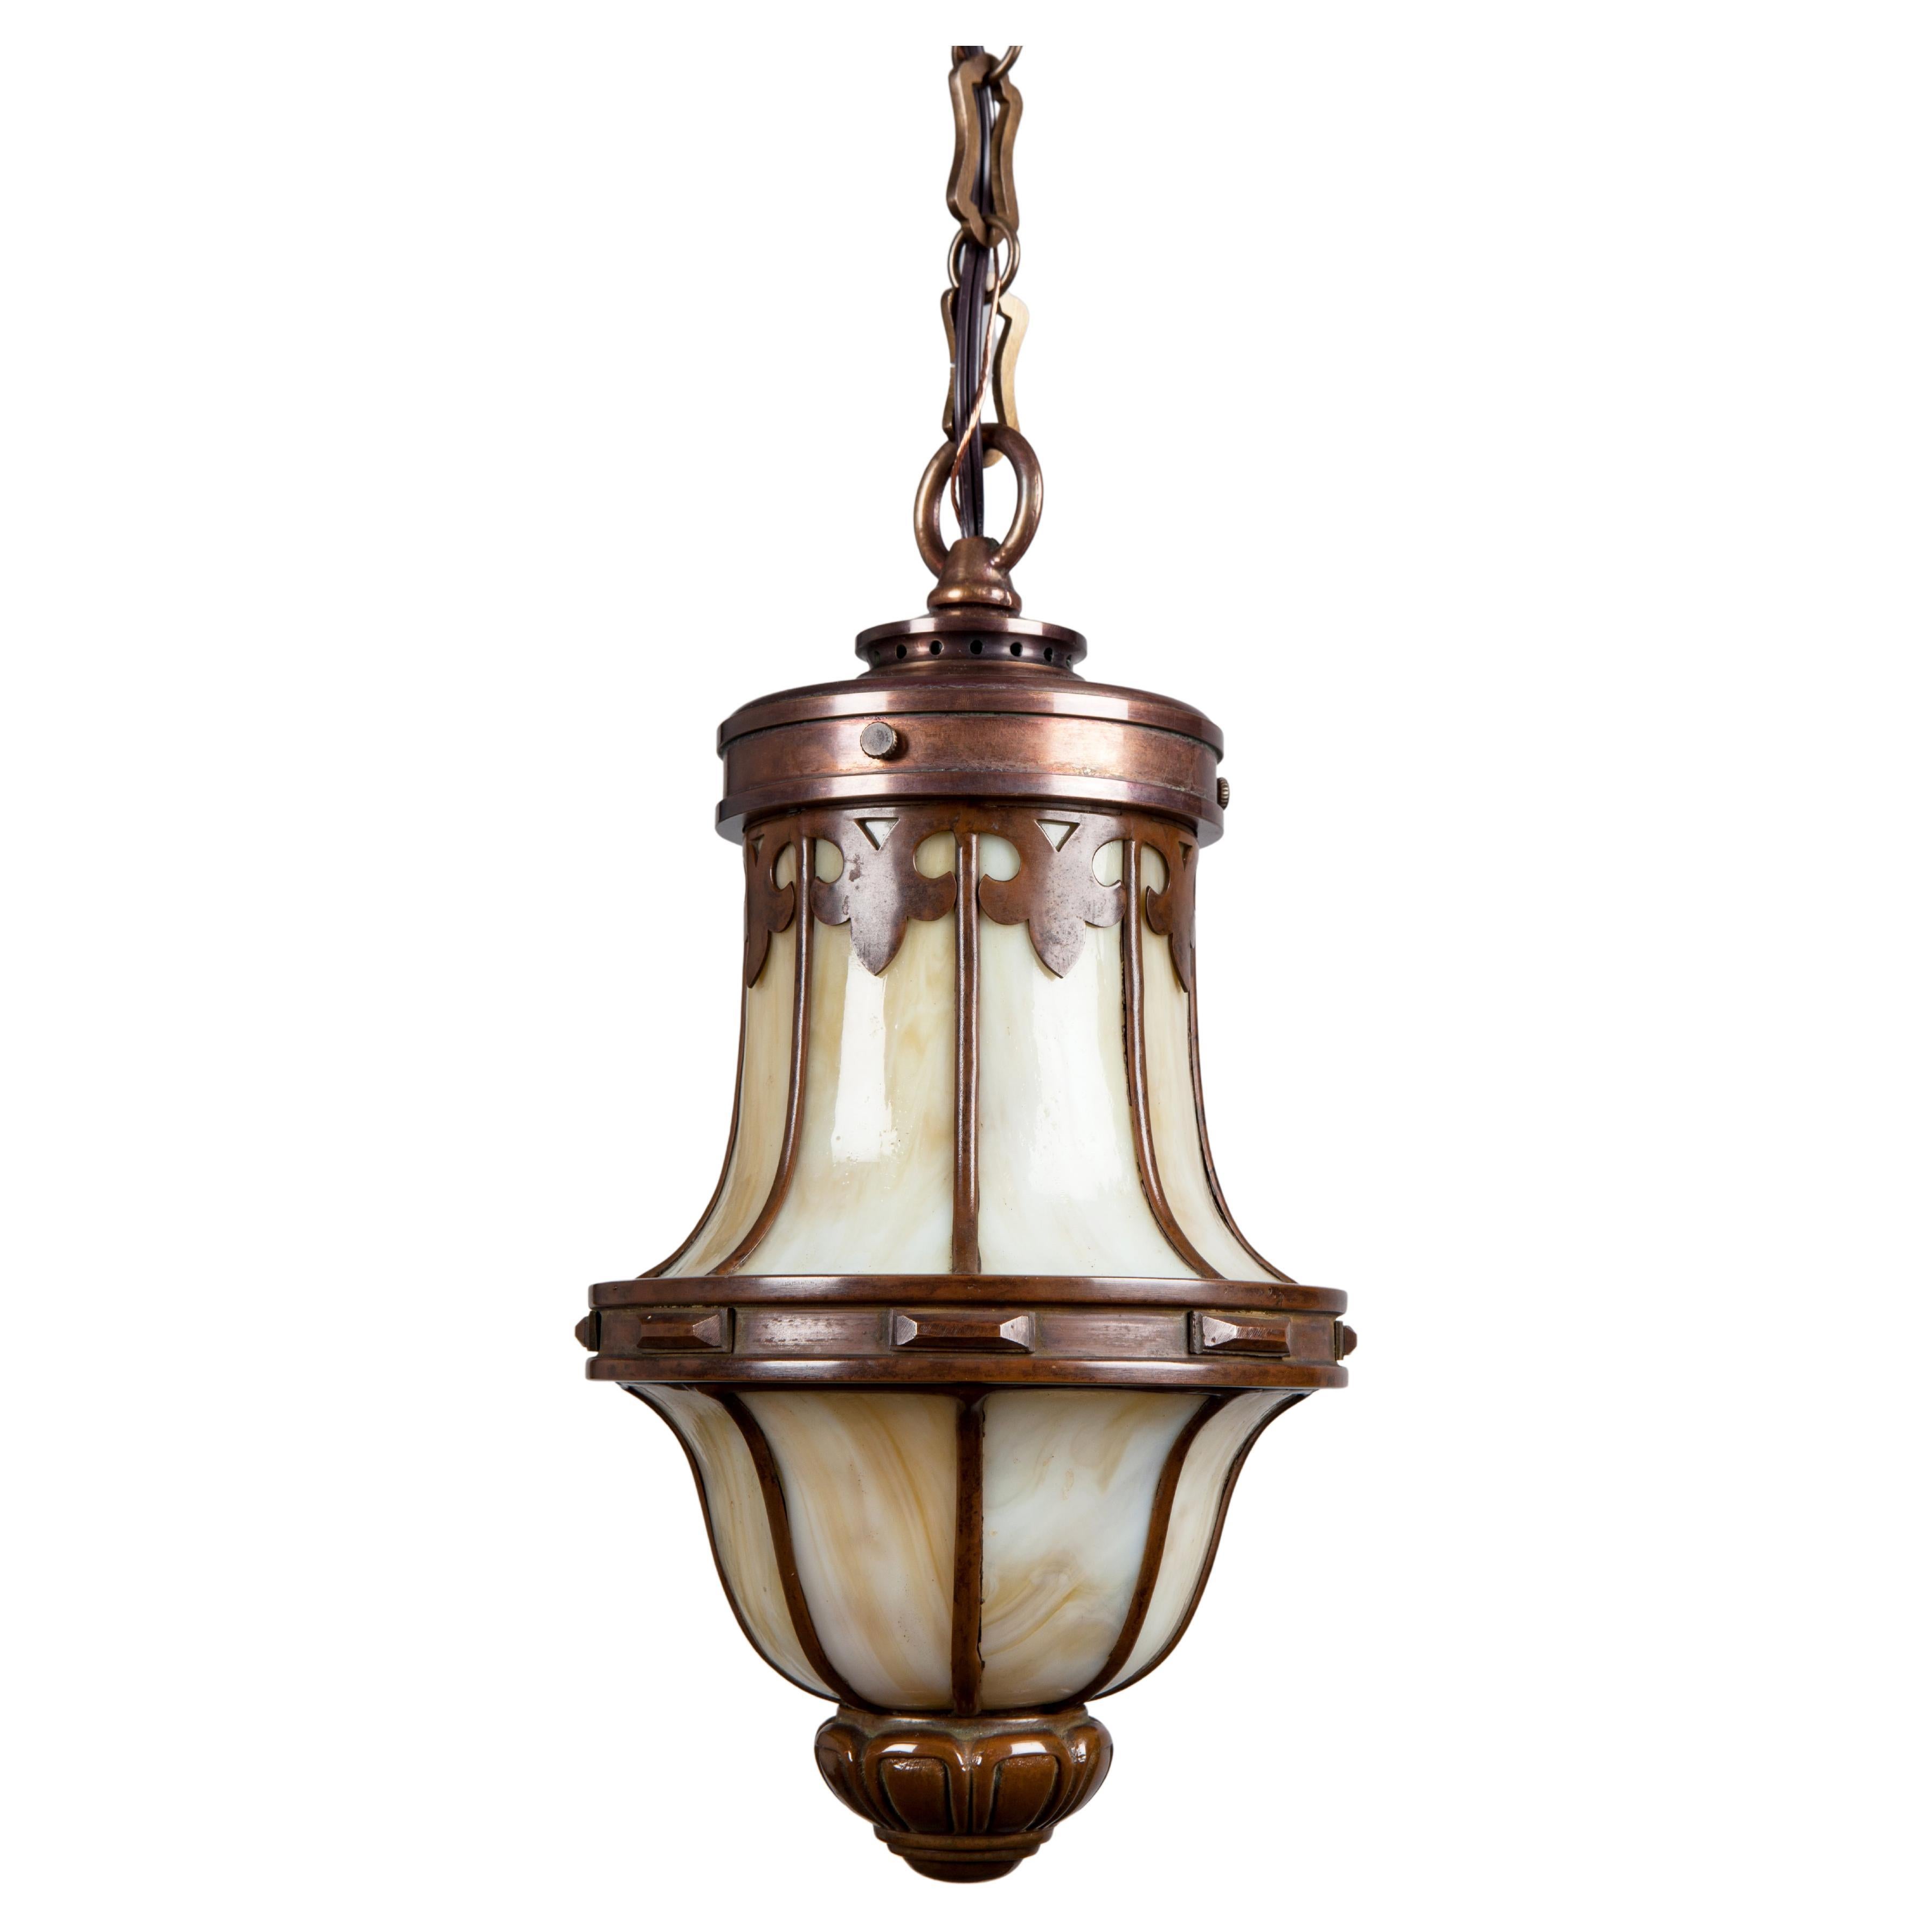 Copper and Bronze Arts and Crafts Lantern with Leaded Glass, Circa 1920